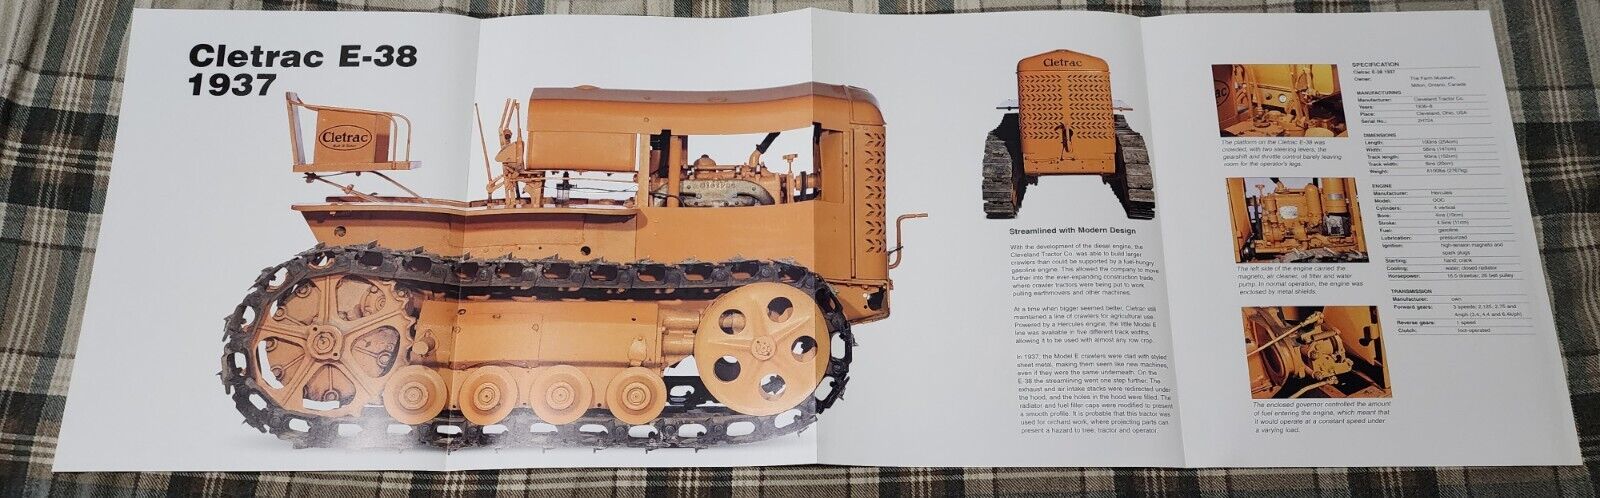 UP CLOSE ~ Cletrac Farm Tractor Poster Print ~ AWESOME